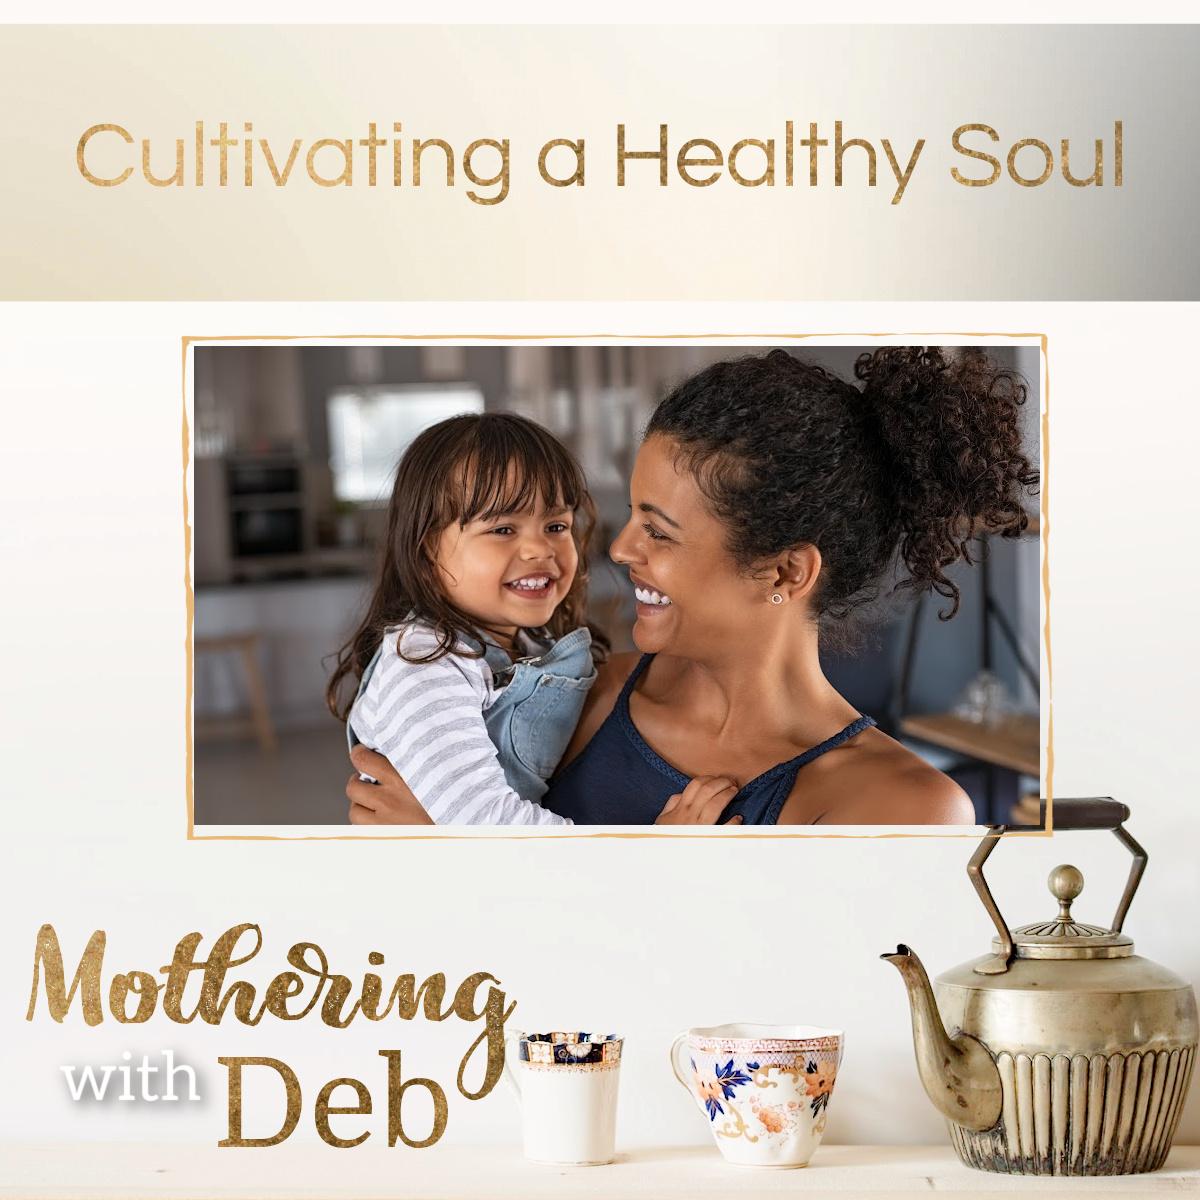 Cultivating a Healthy Soul